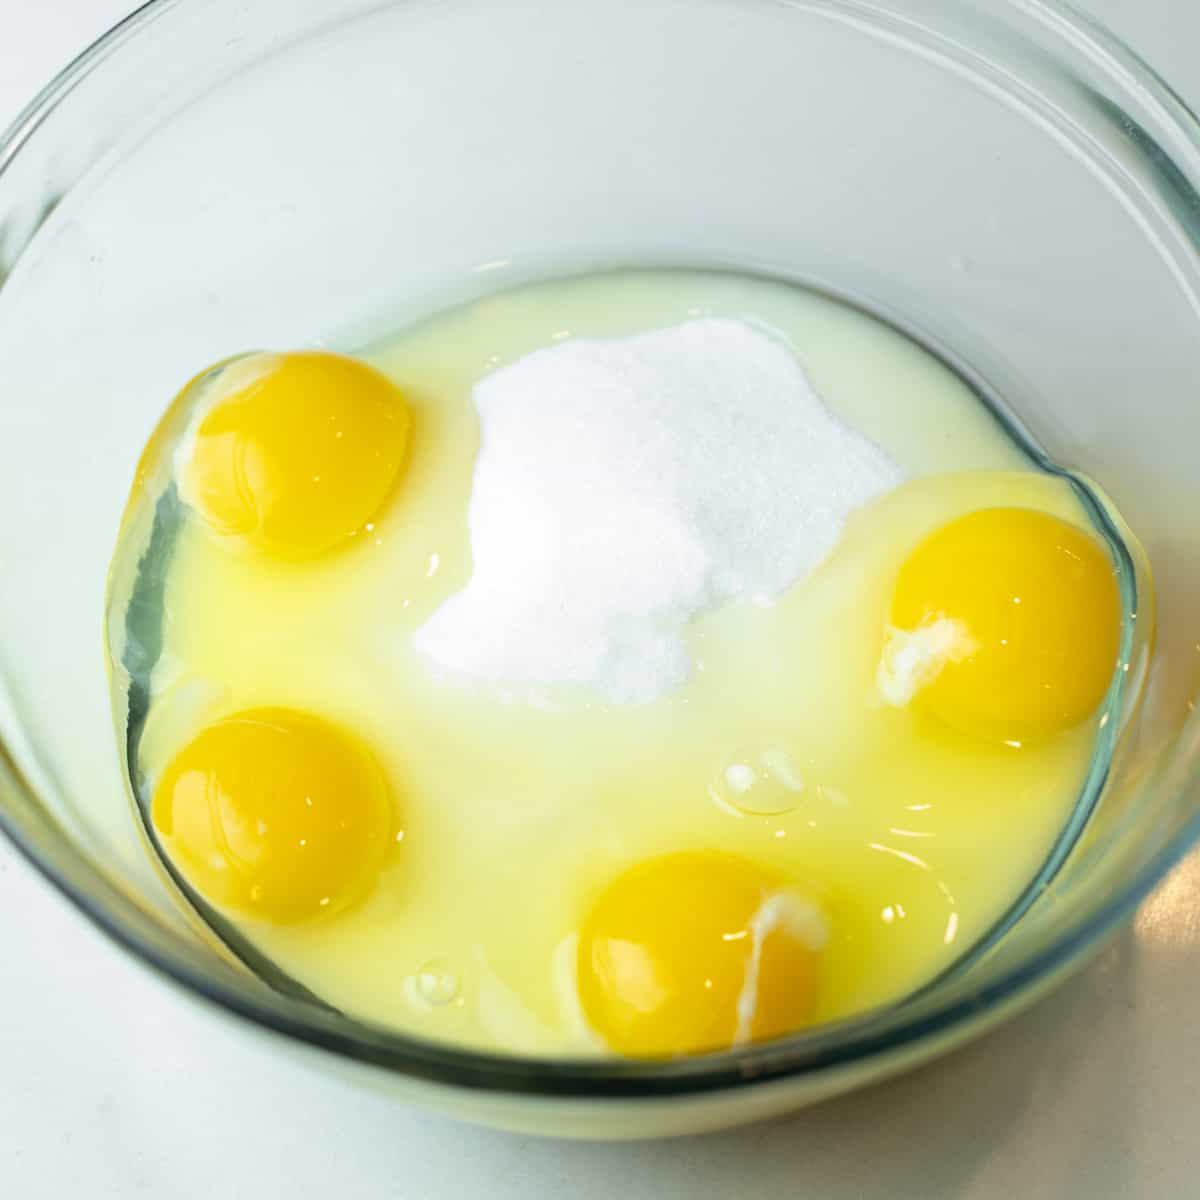 Four eggs in a glass bowl with sugar.